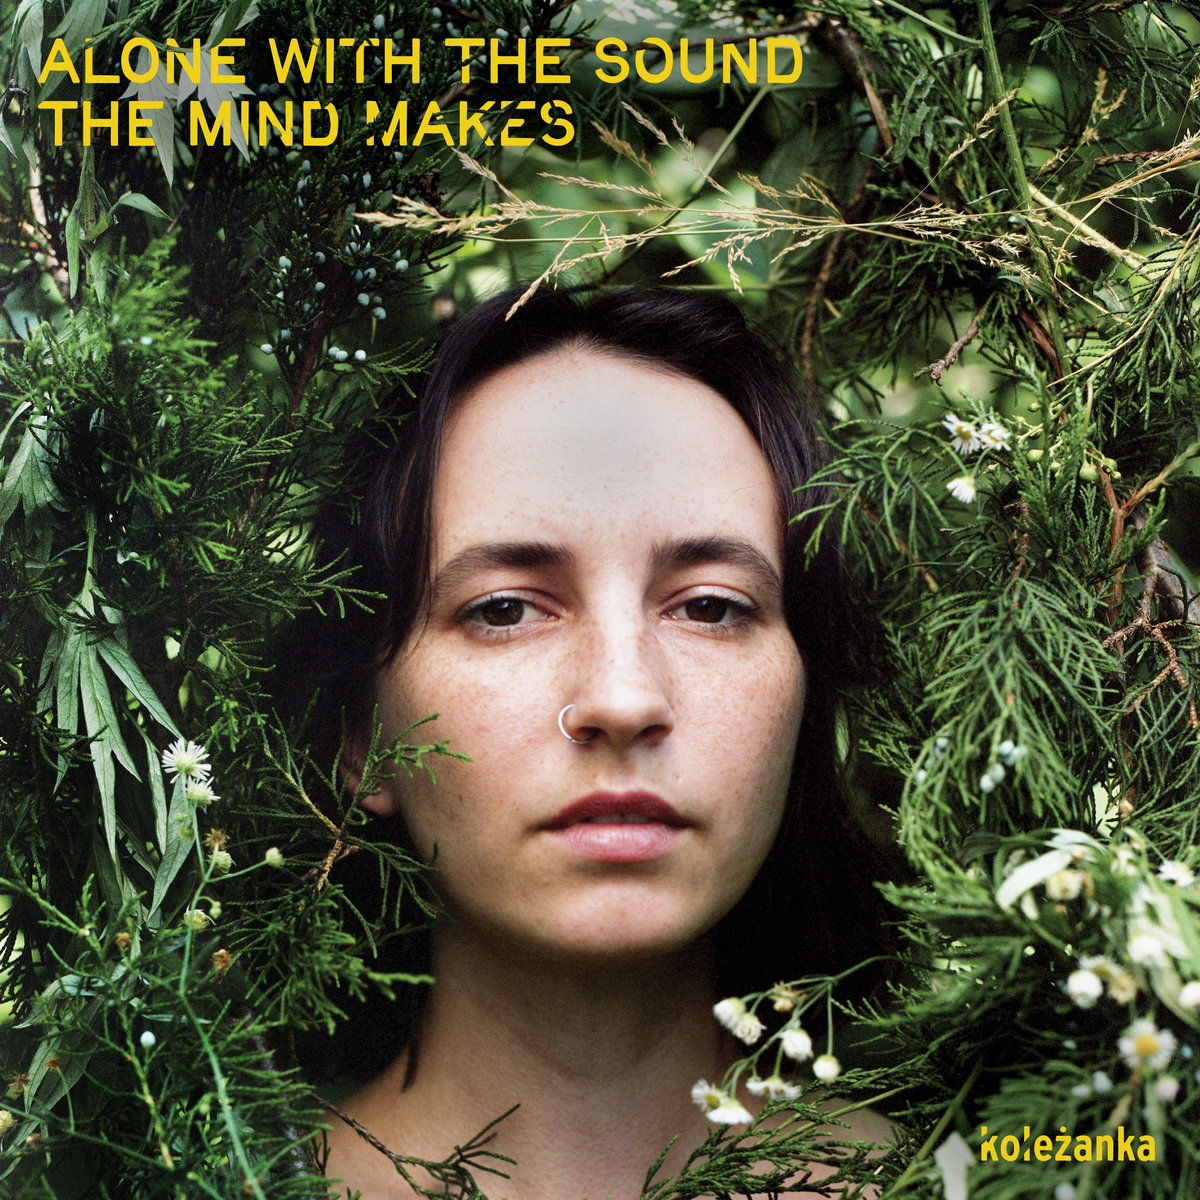 Artwork for Alone with the Sound the Mind Makes by koleżanka